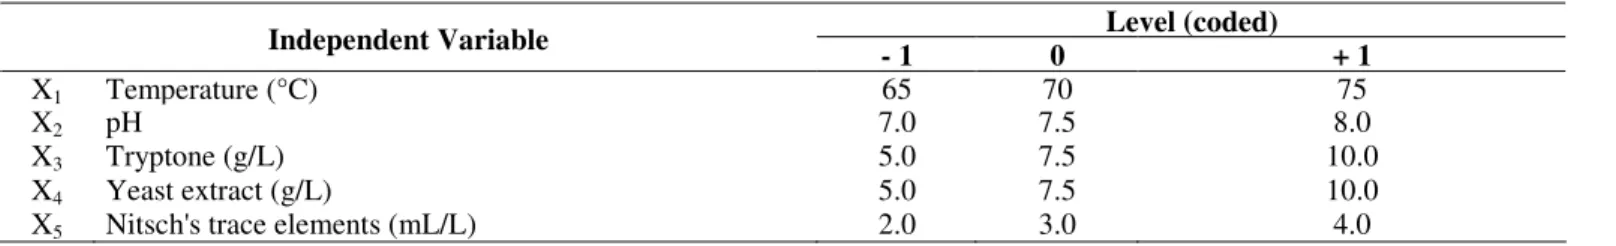 Table 1. Independent variable levels used in the fractional factorial design 